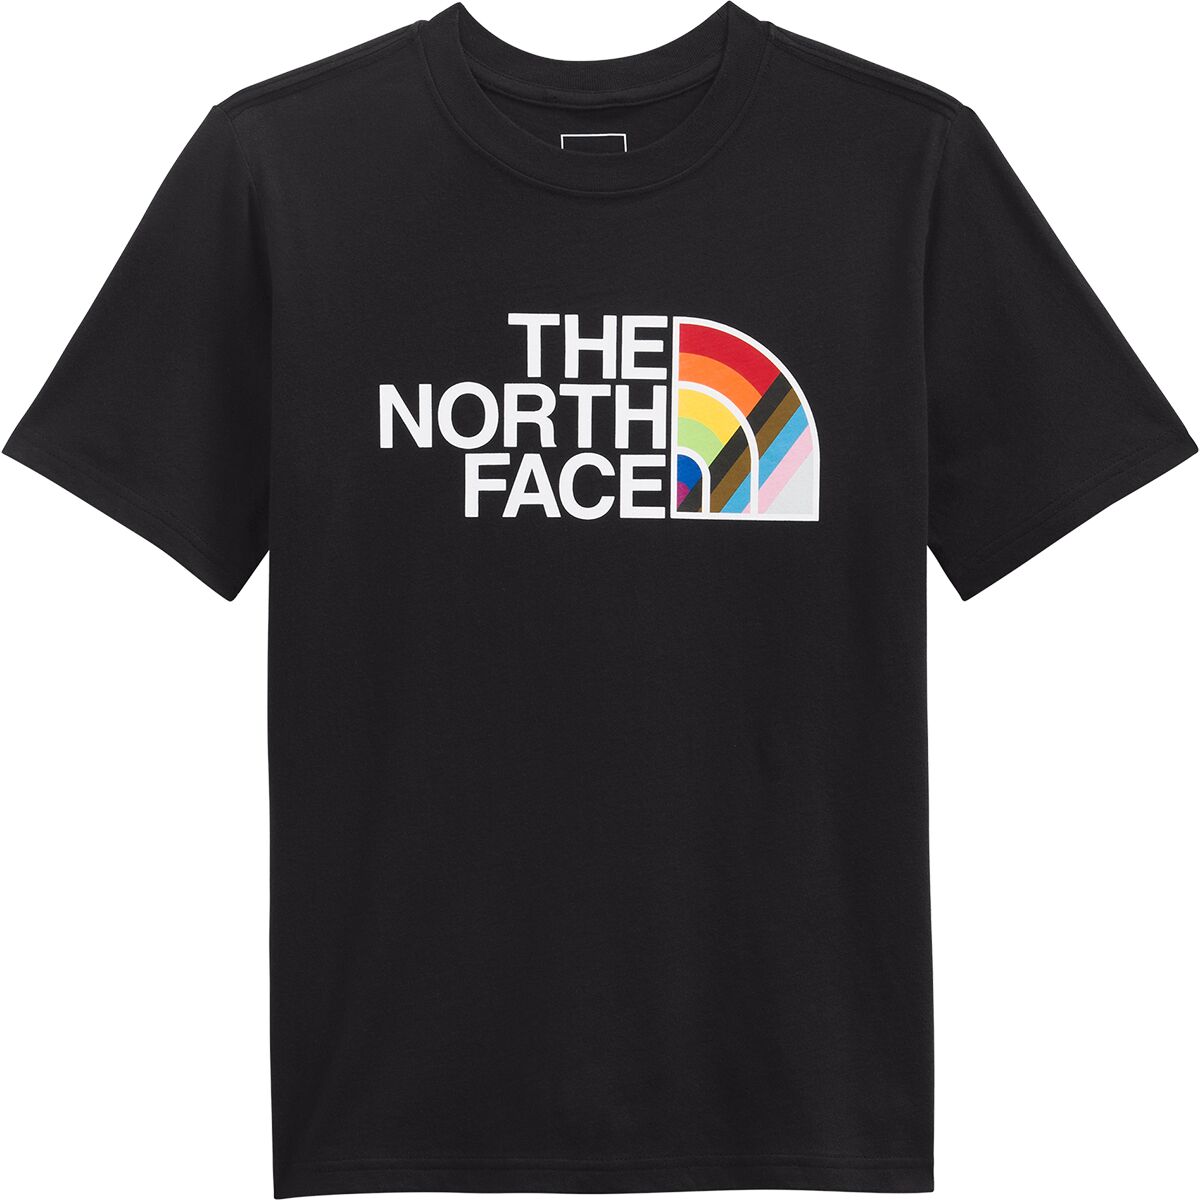 The North Face Printed Pride Graphic Short-Sleeve T-Shirt - Boys'